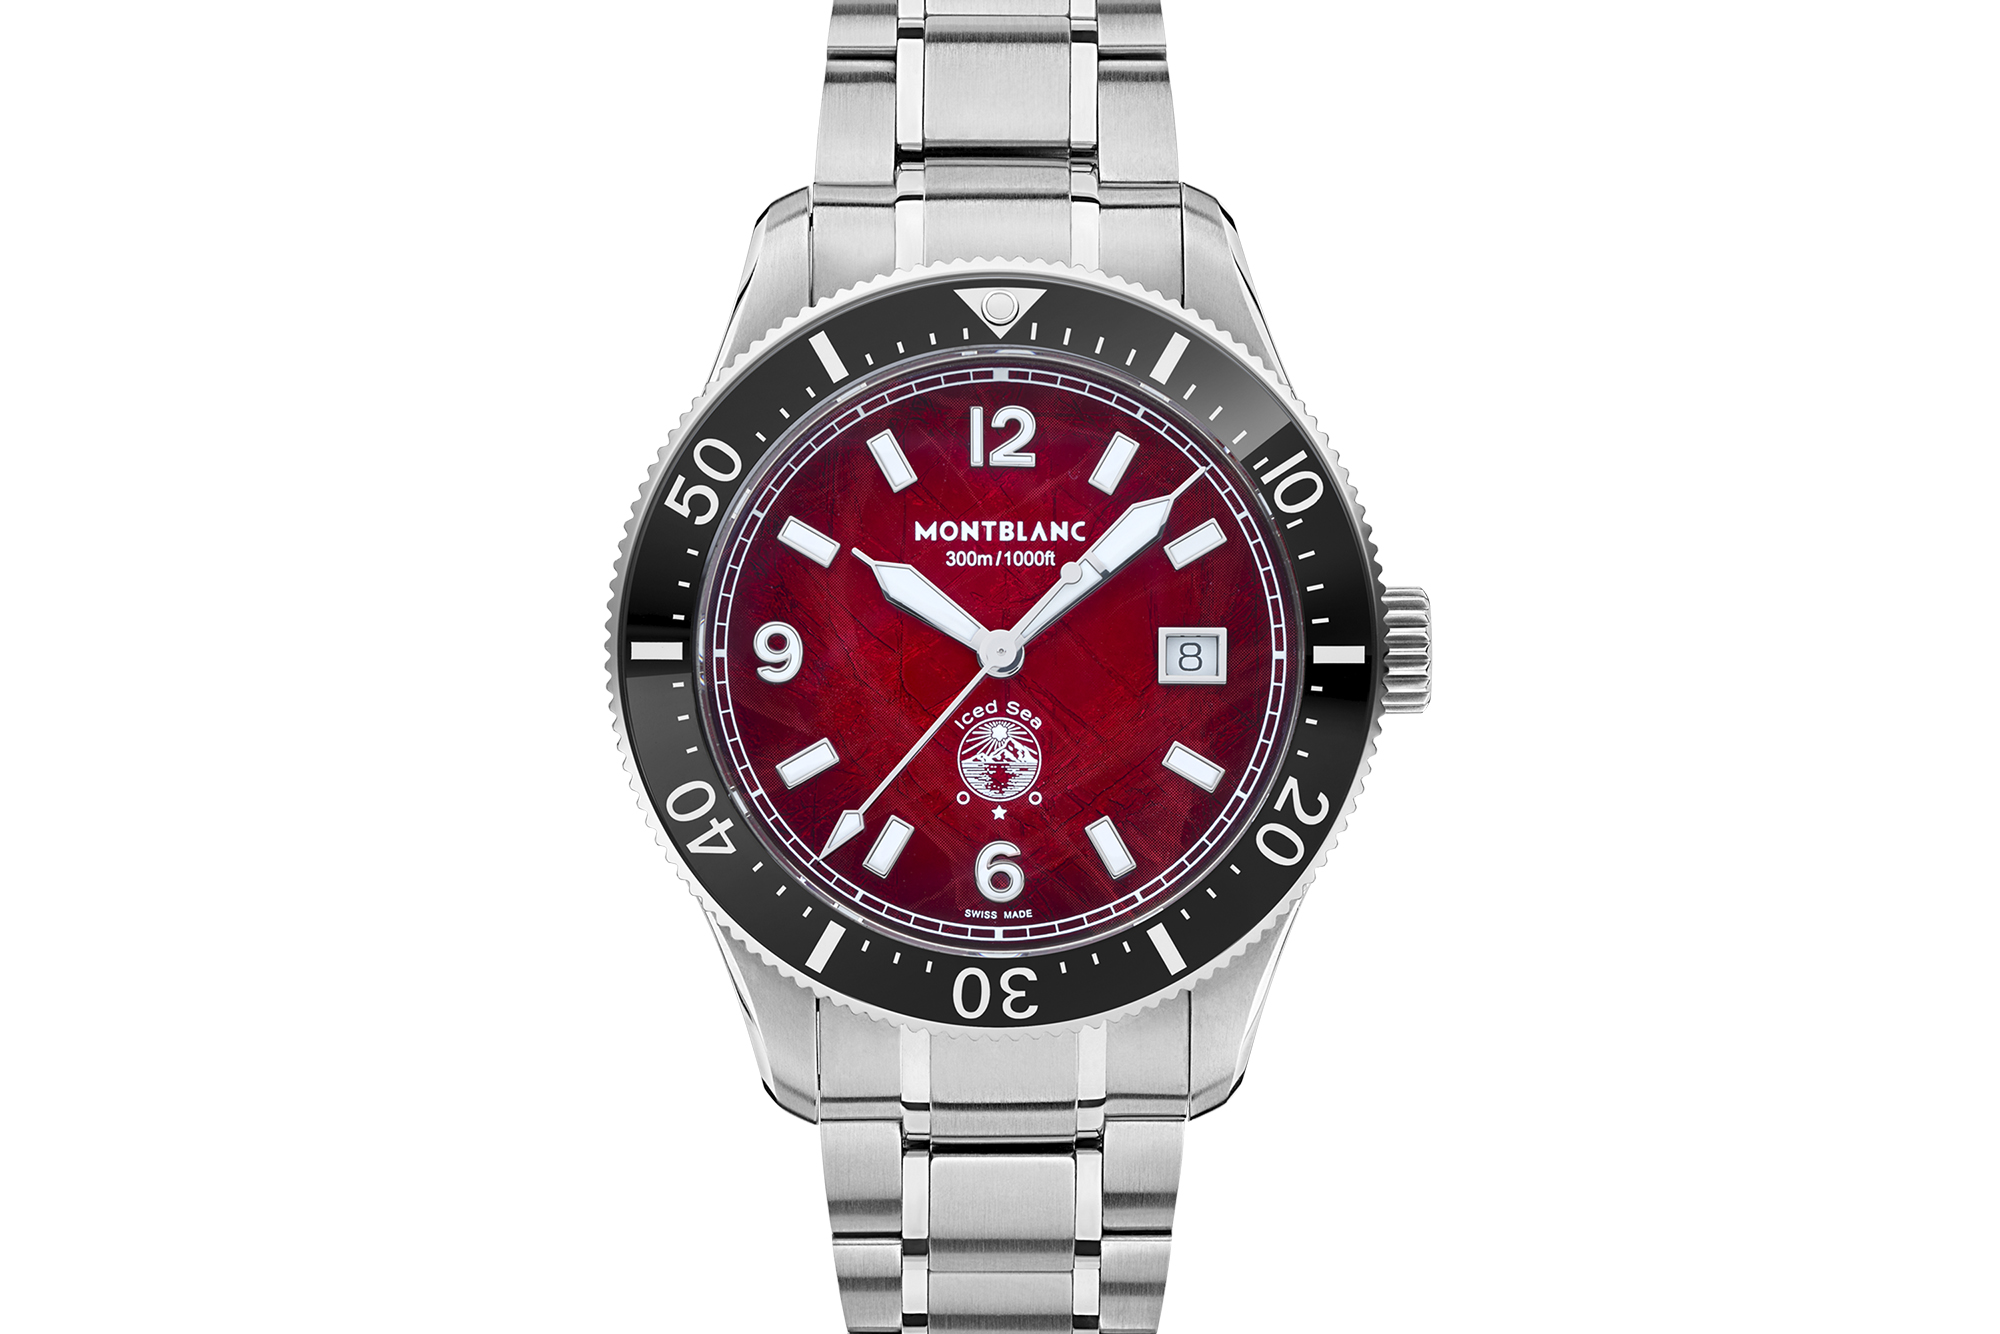 Montblanc Iced Sea Red Edition